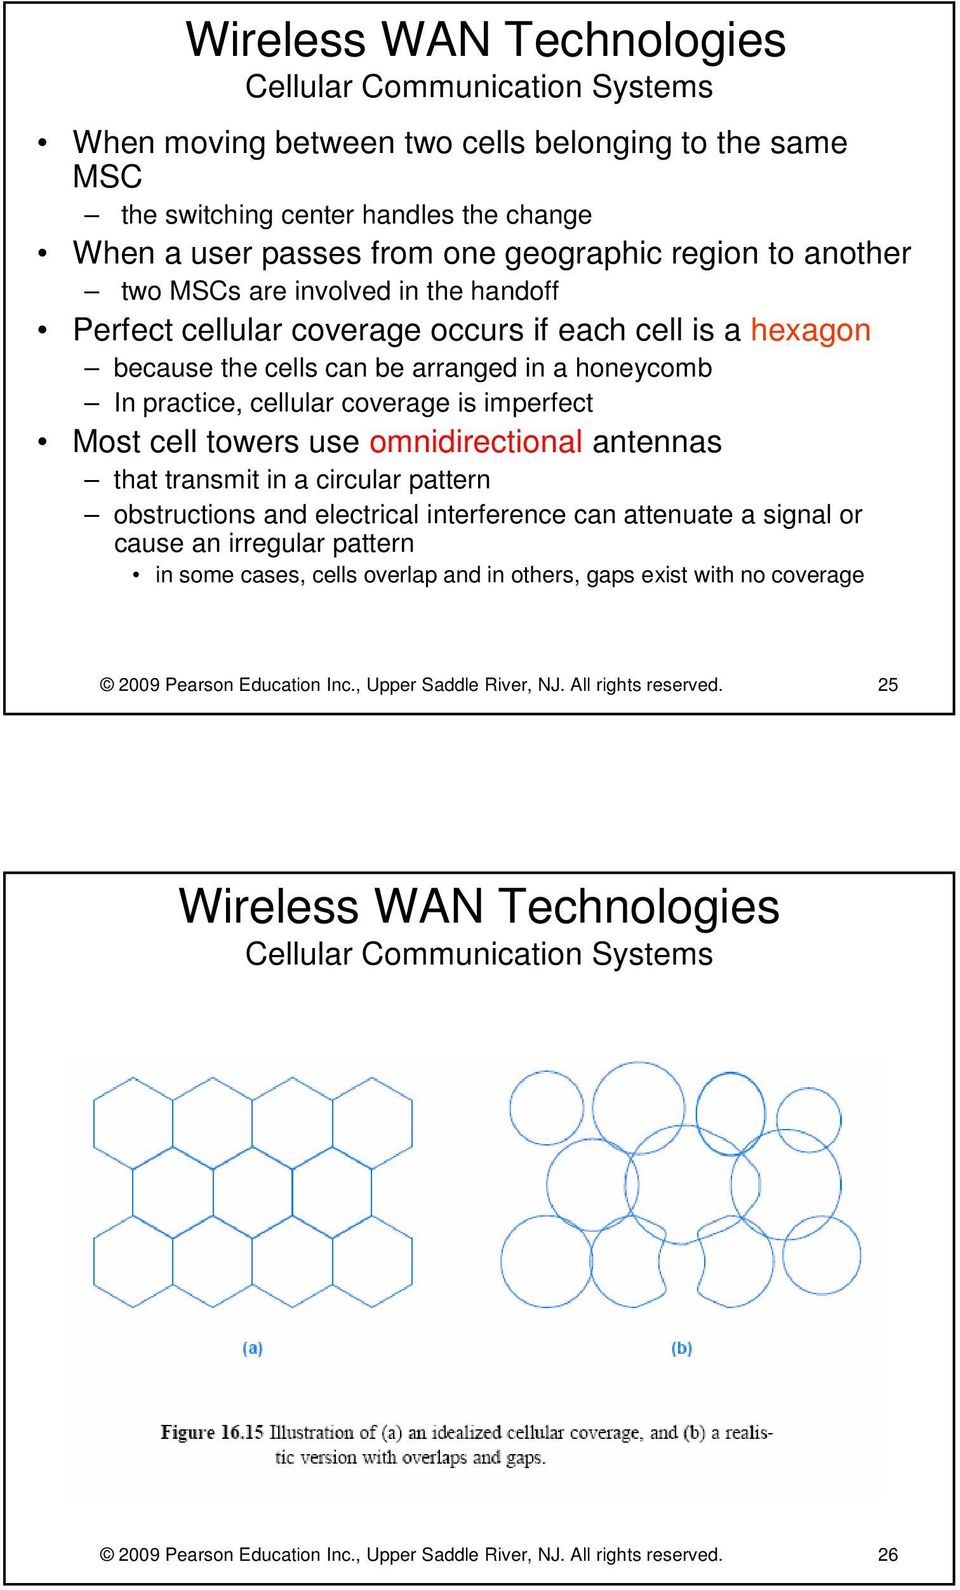 Most cell towers use omnidirectional antennas that transmit in a circular pattern obstructions and electrical interference can attenuate a signal or cause an irregular pattern in some cases, cells